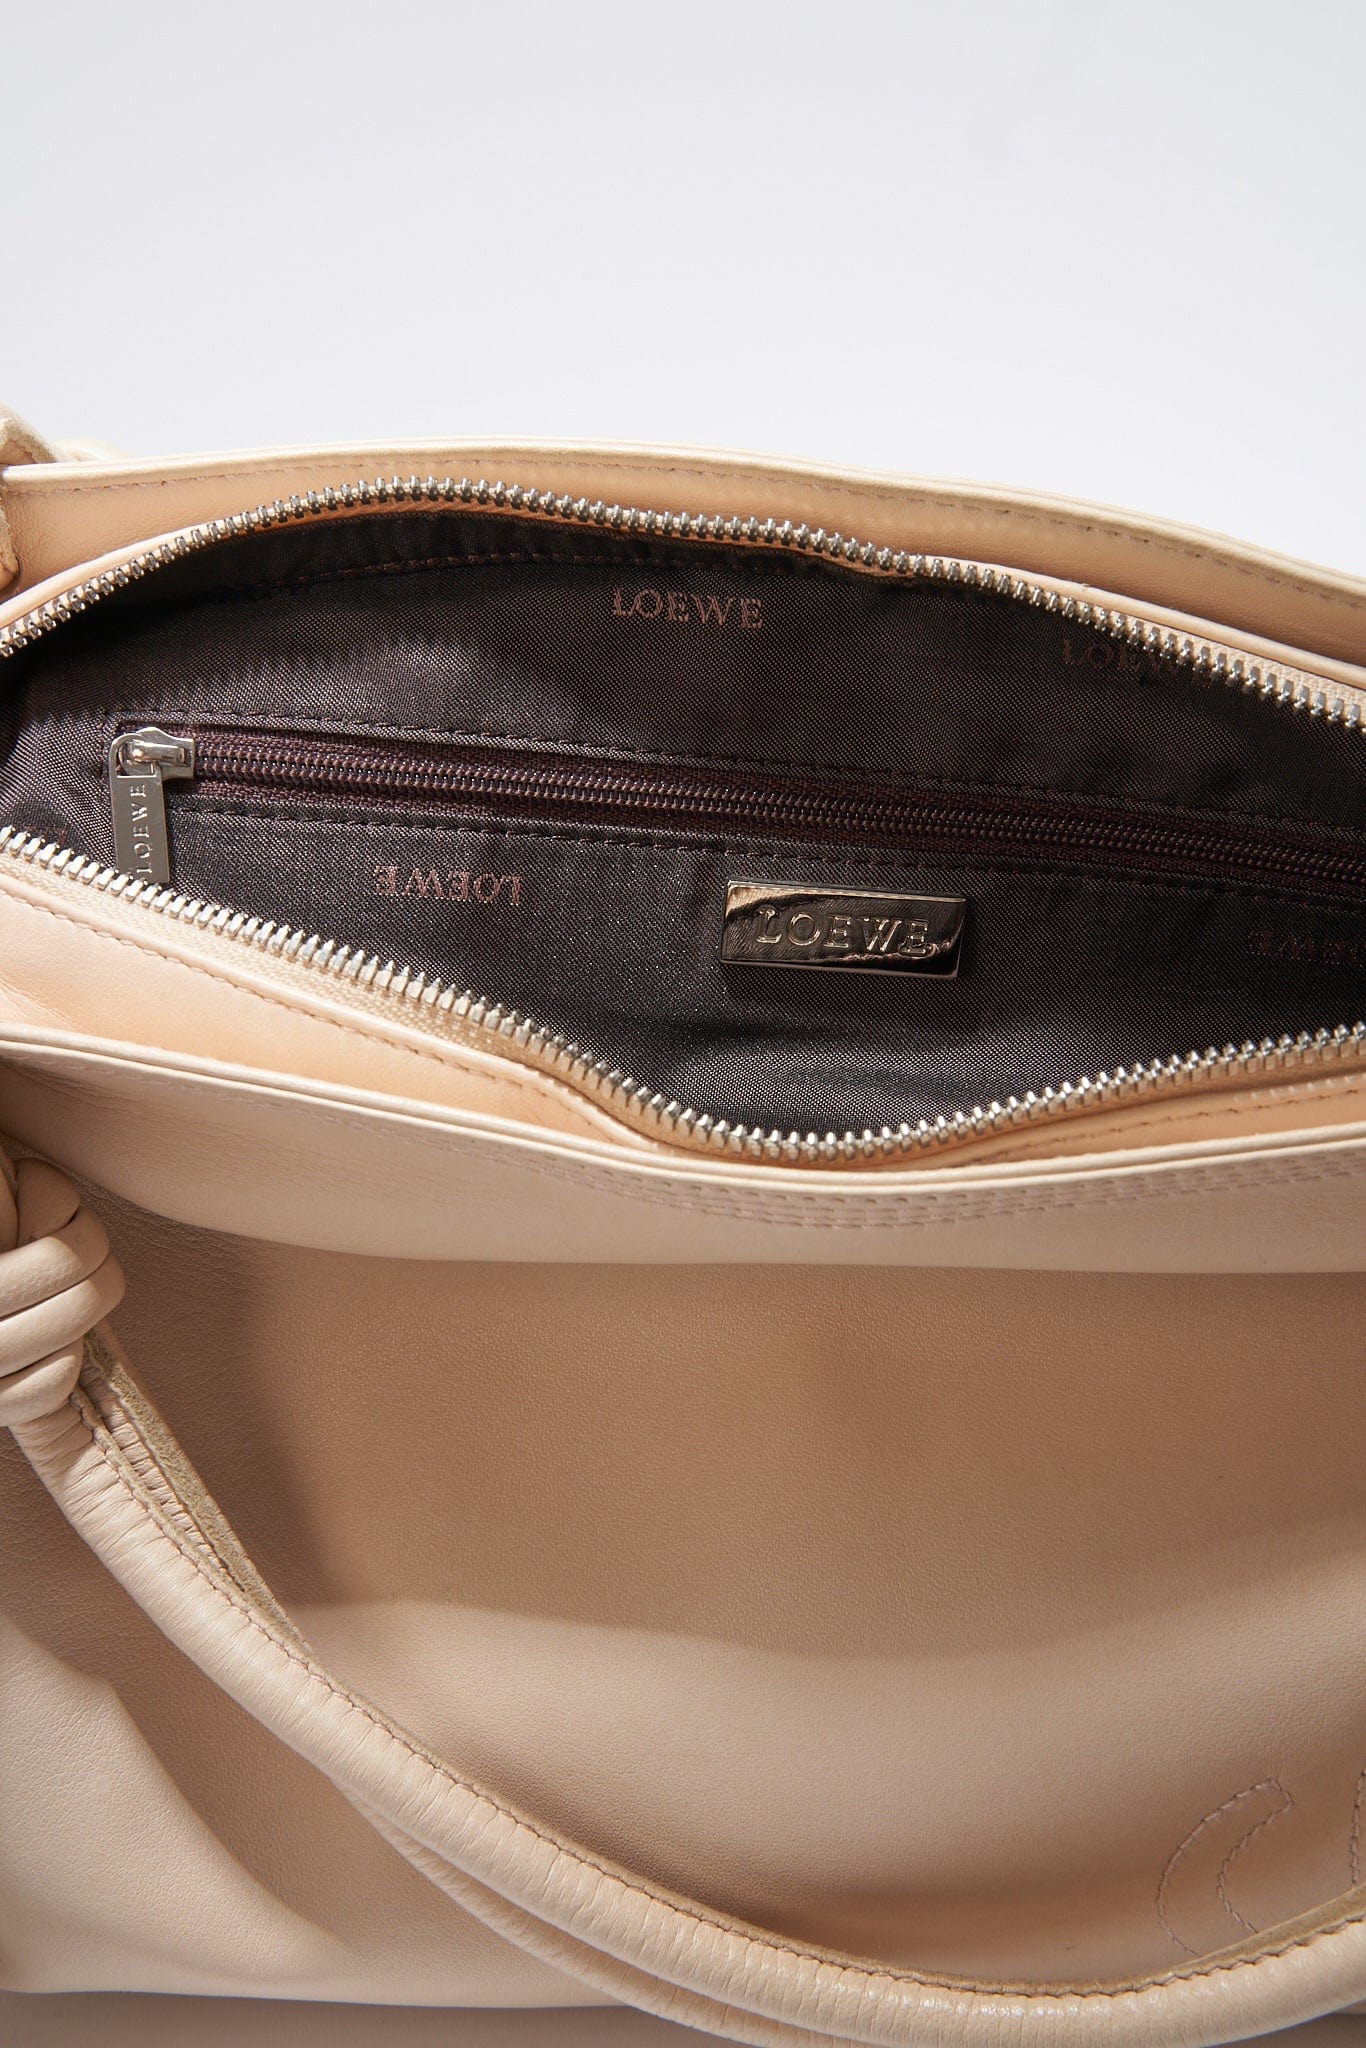 Loewe - Authenticated Gate Pocket Handbag - Leather Brown Plain for Women, Very Good Condition